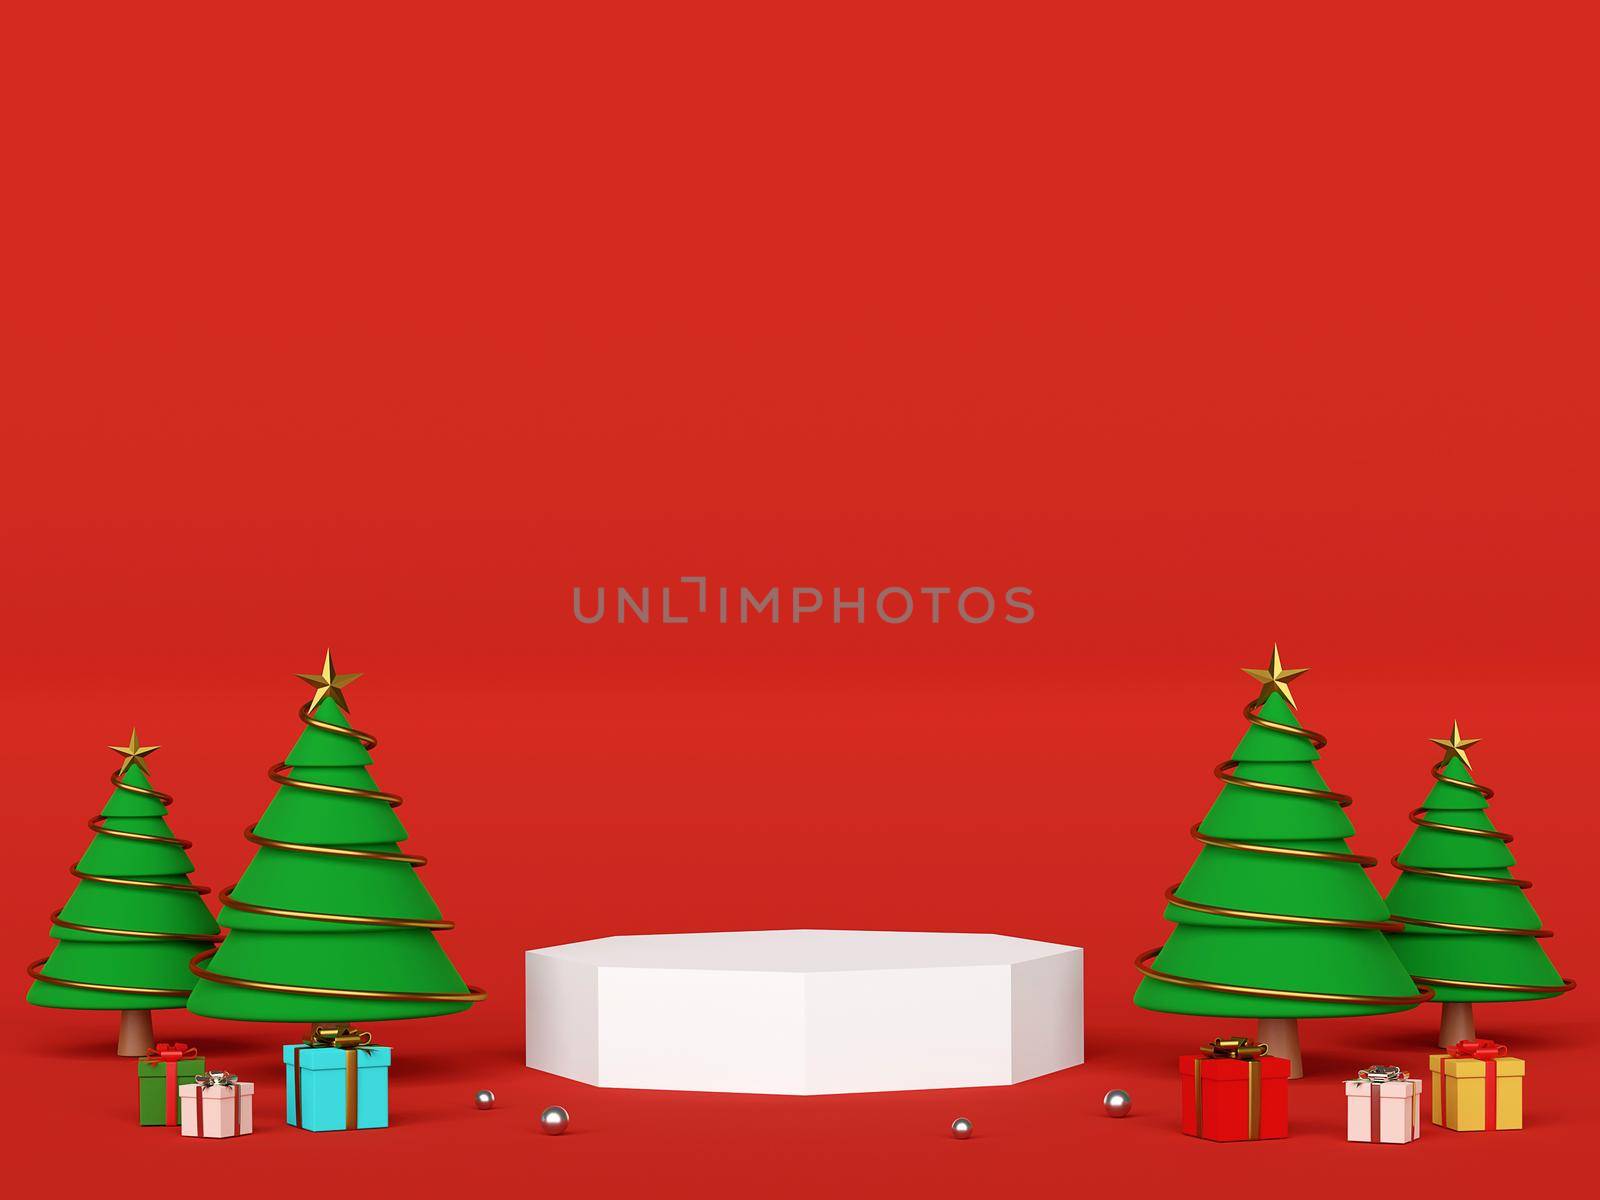 Scene of podium with Christmas tree for product advertisement, 3d rendering by nutzchotwarut